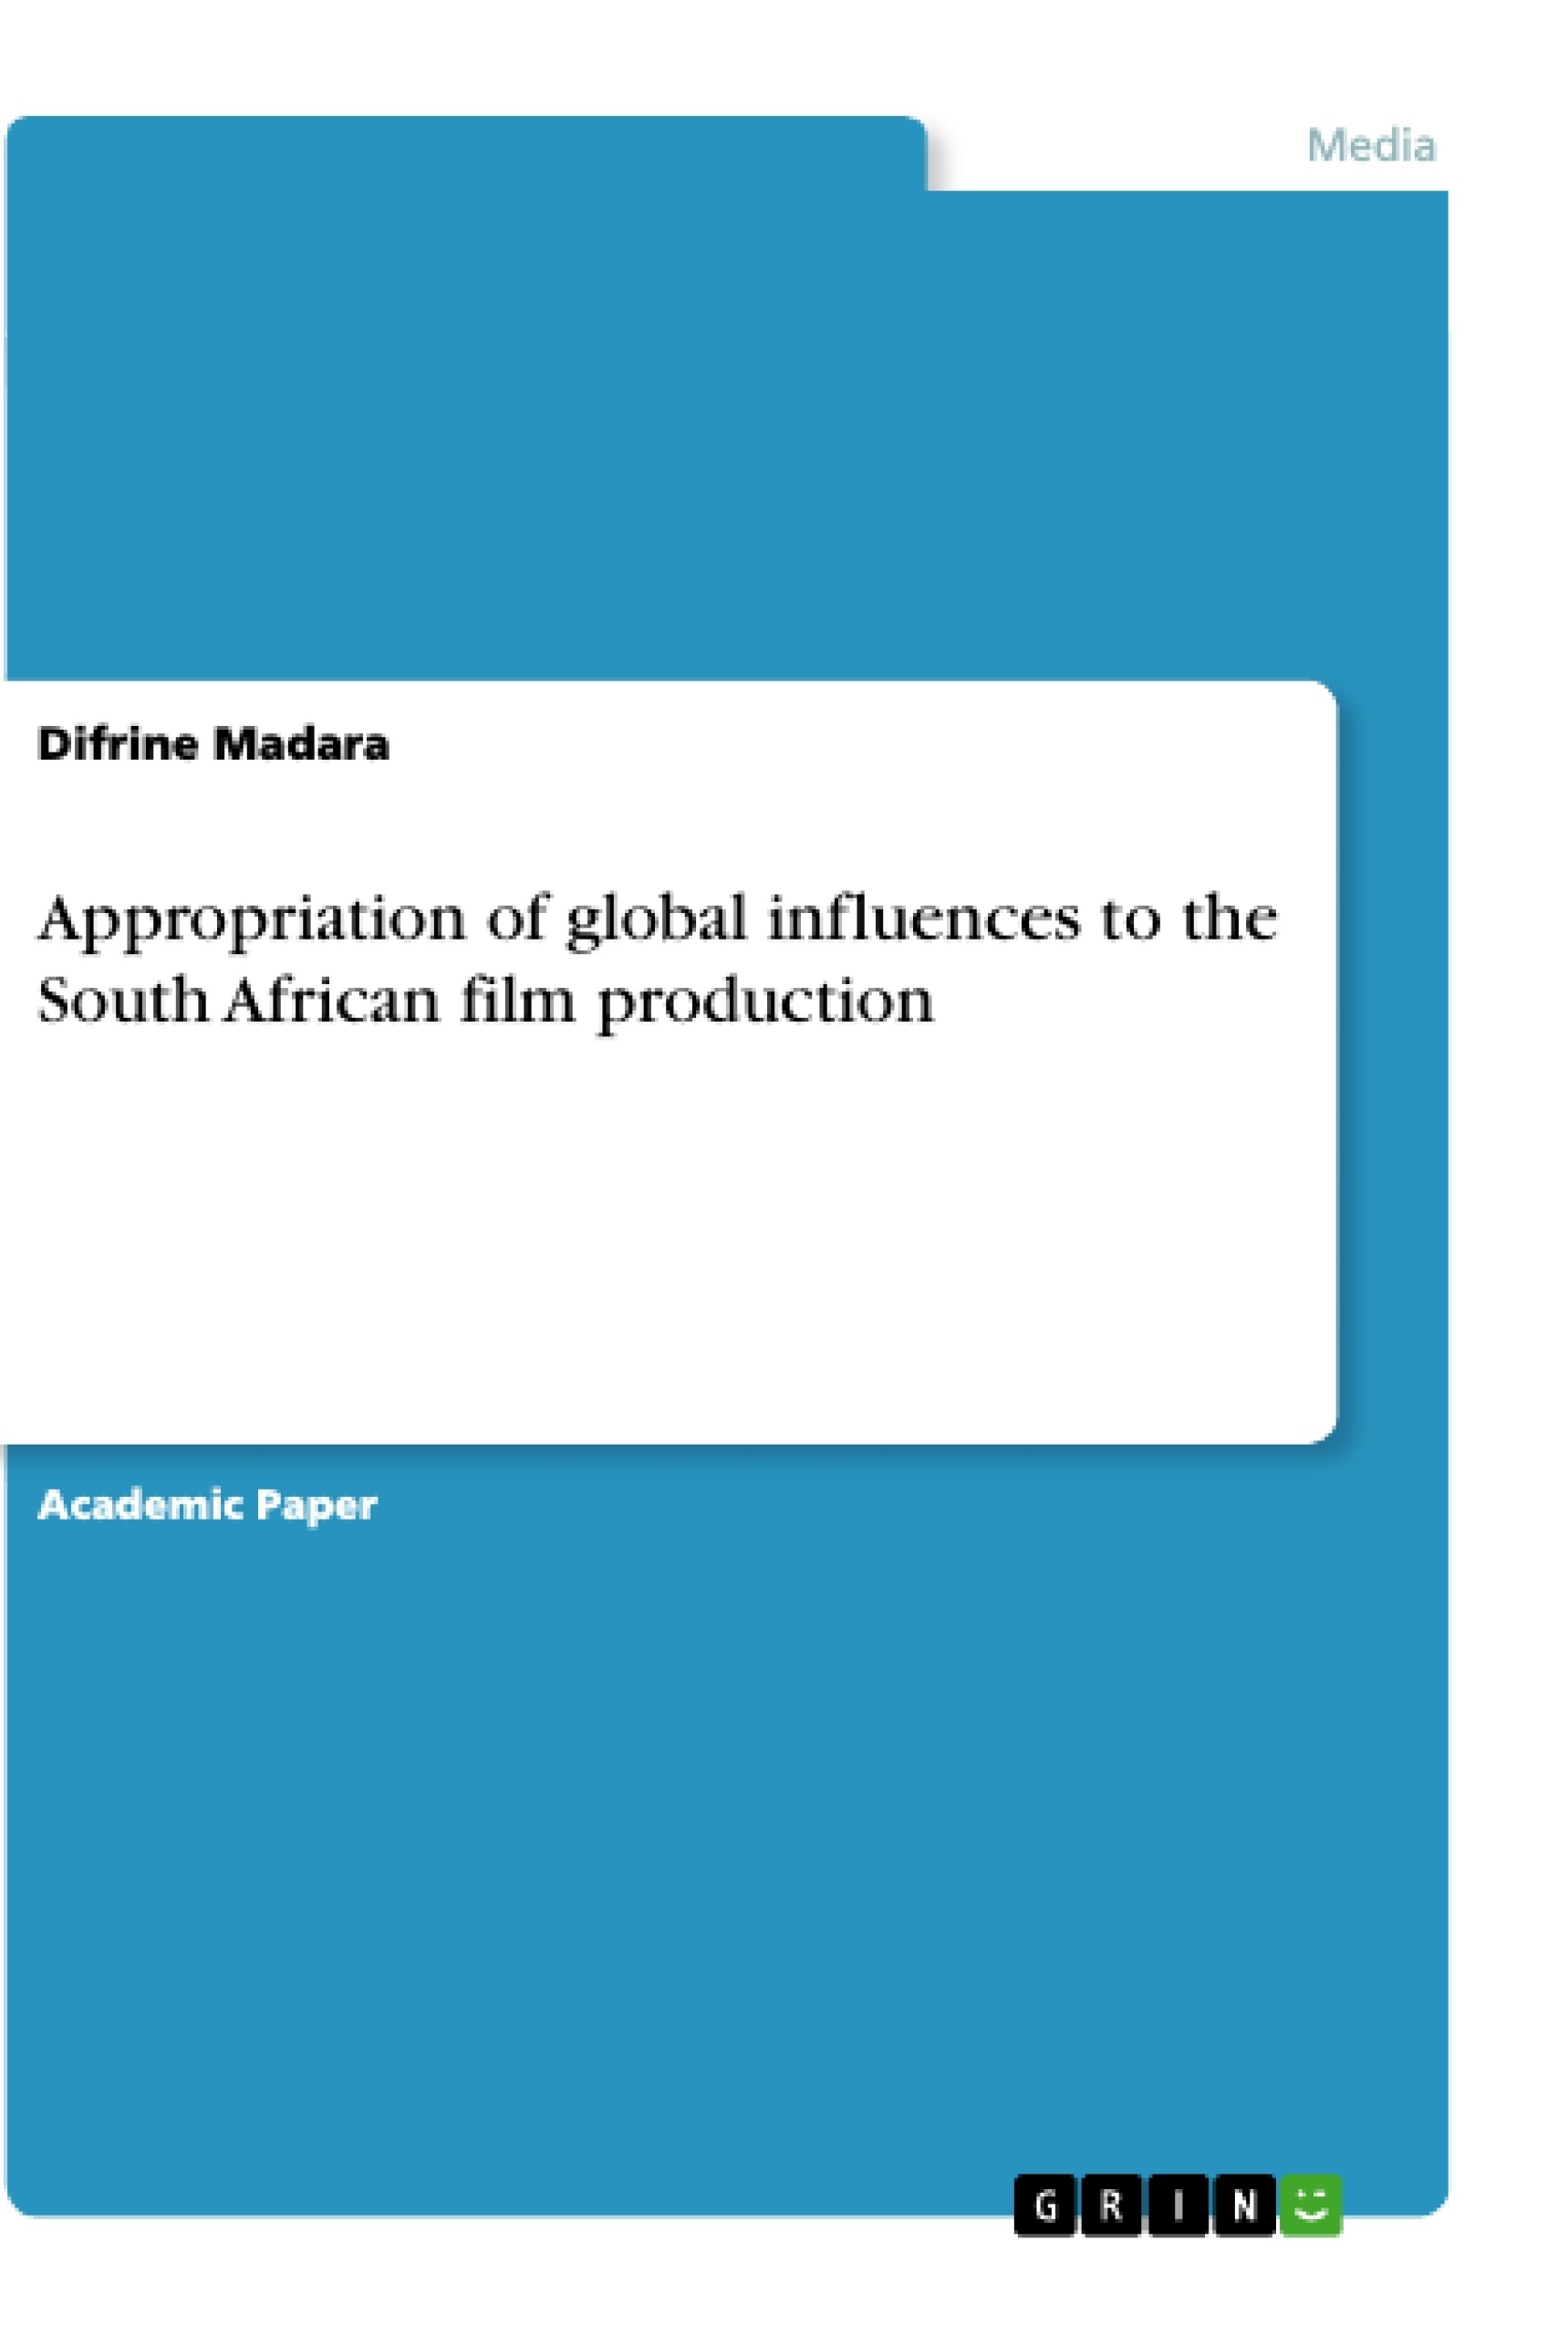 Title: Appropriation of global influences to the South African film production